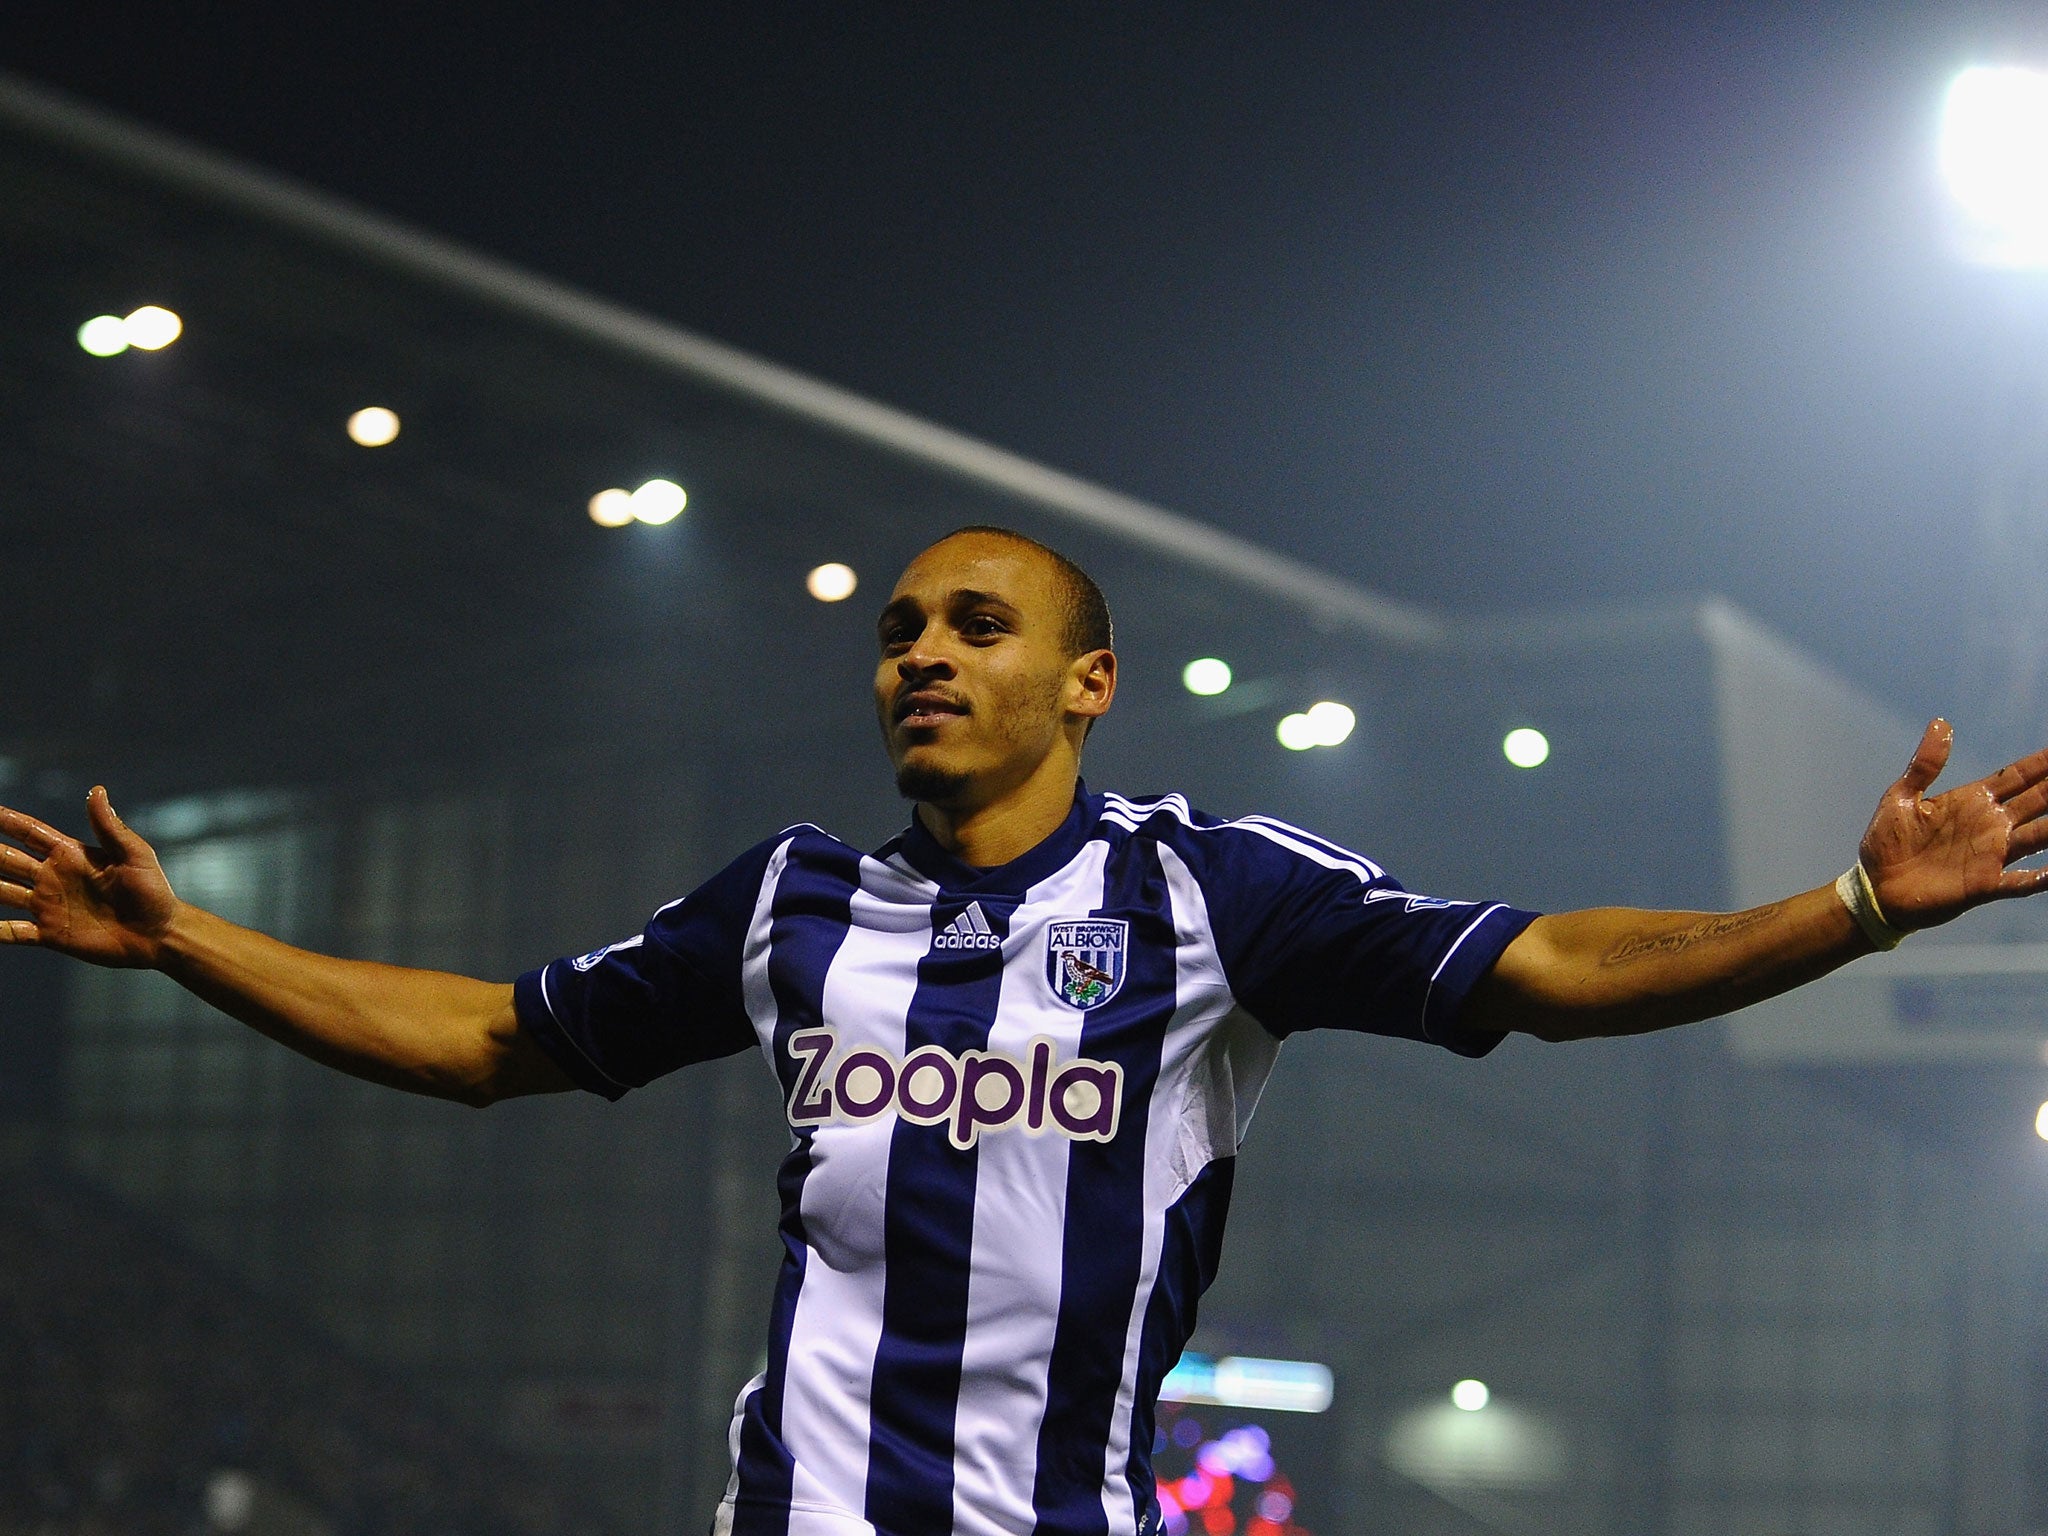 West Bromwich Albion disappointed with 'unprofessional' Peter